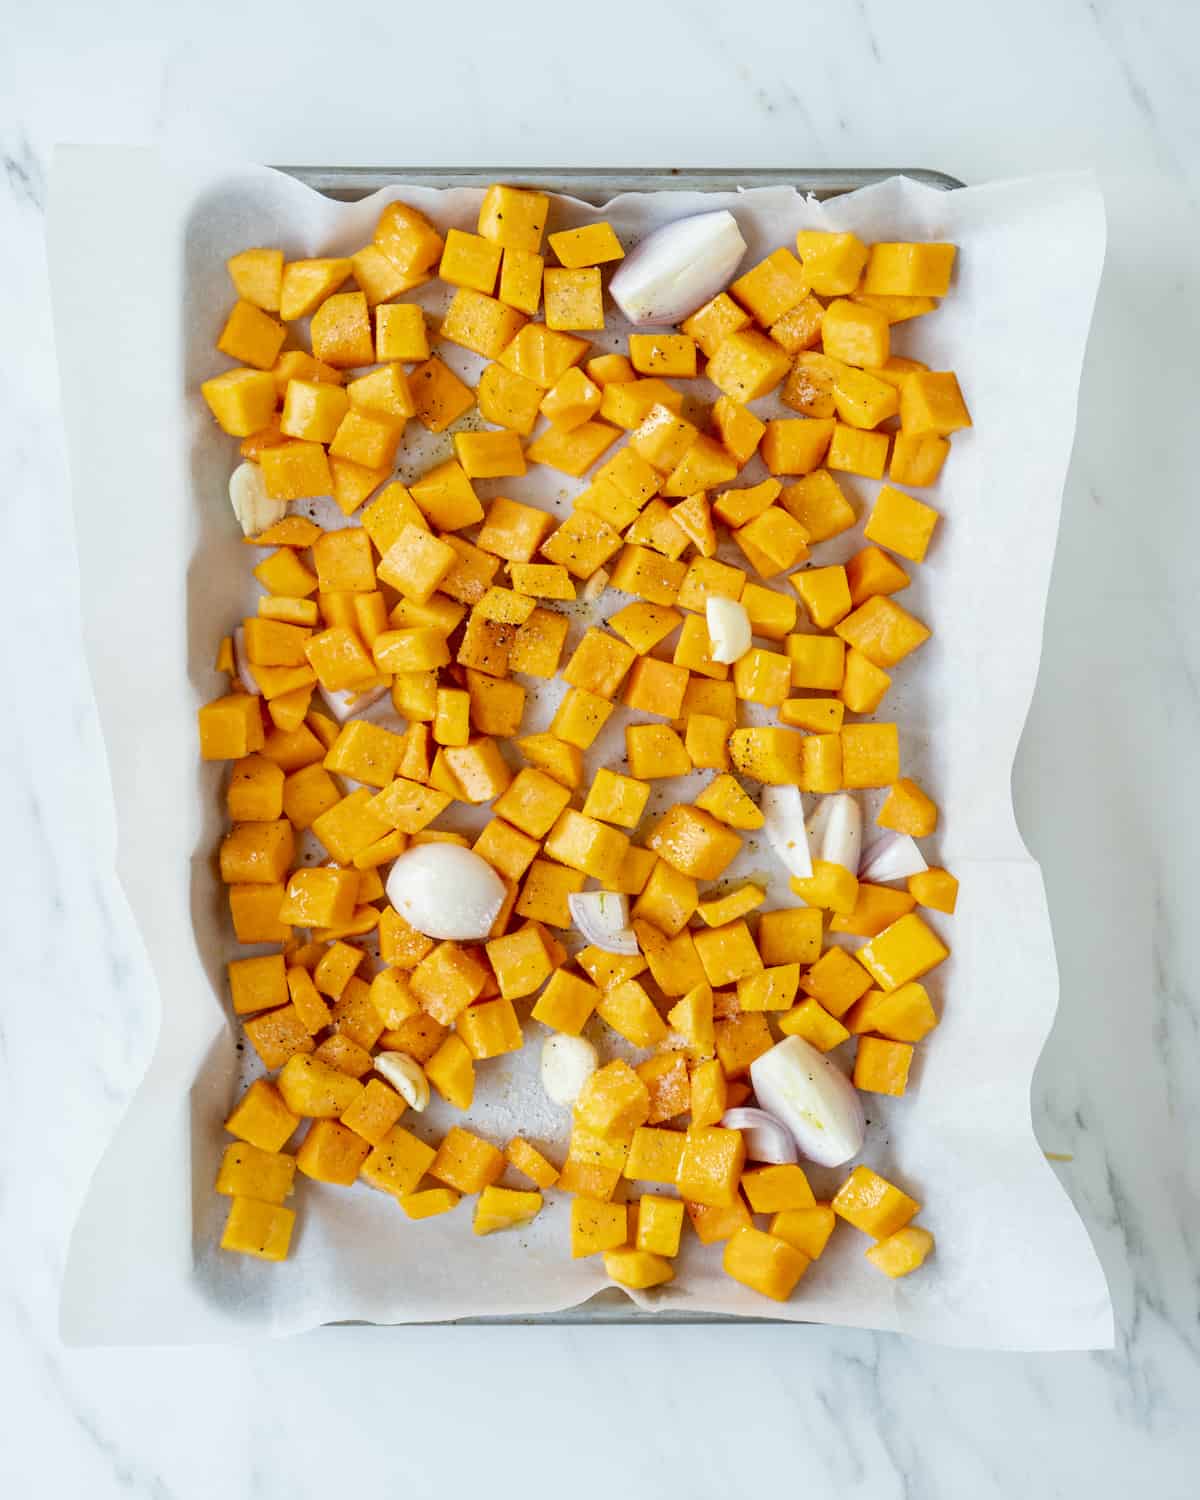 A sheet pan lined with parchment paper of butternut squash, shallots, garlic, and drizzled olive oil, seasoned with salt and pepper.